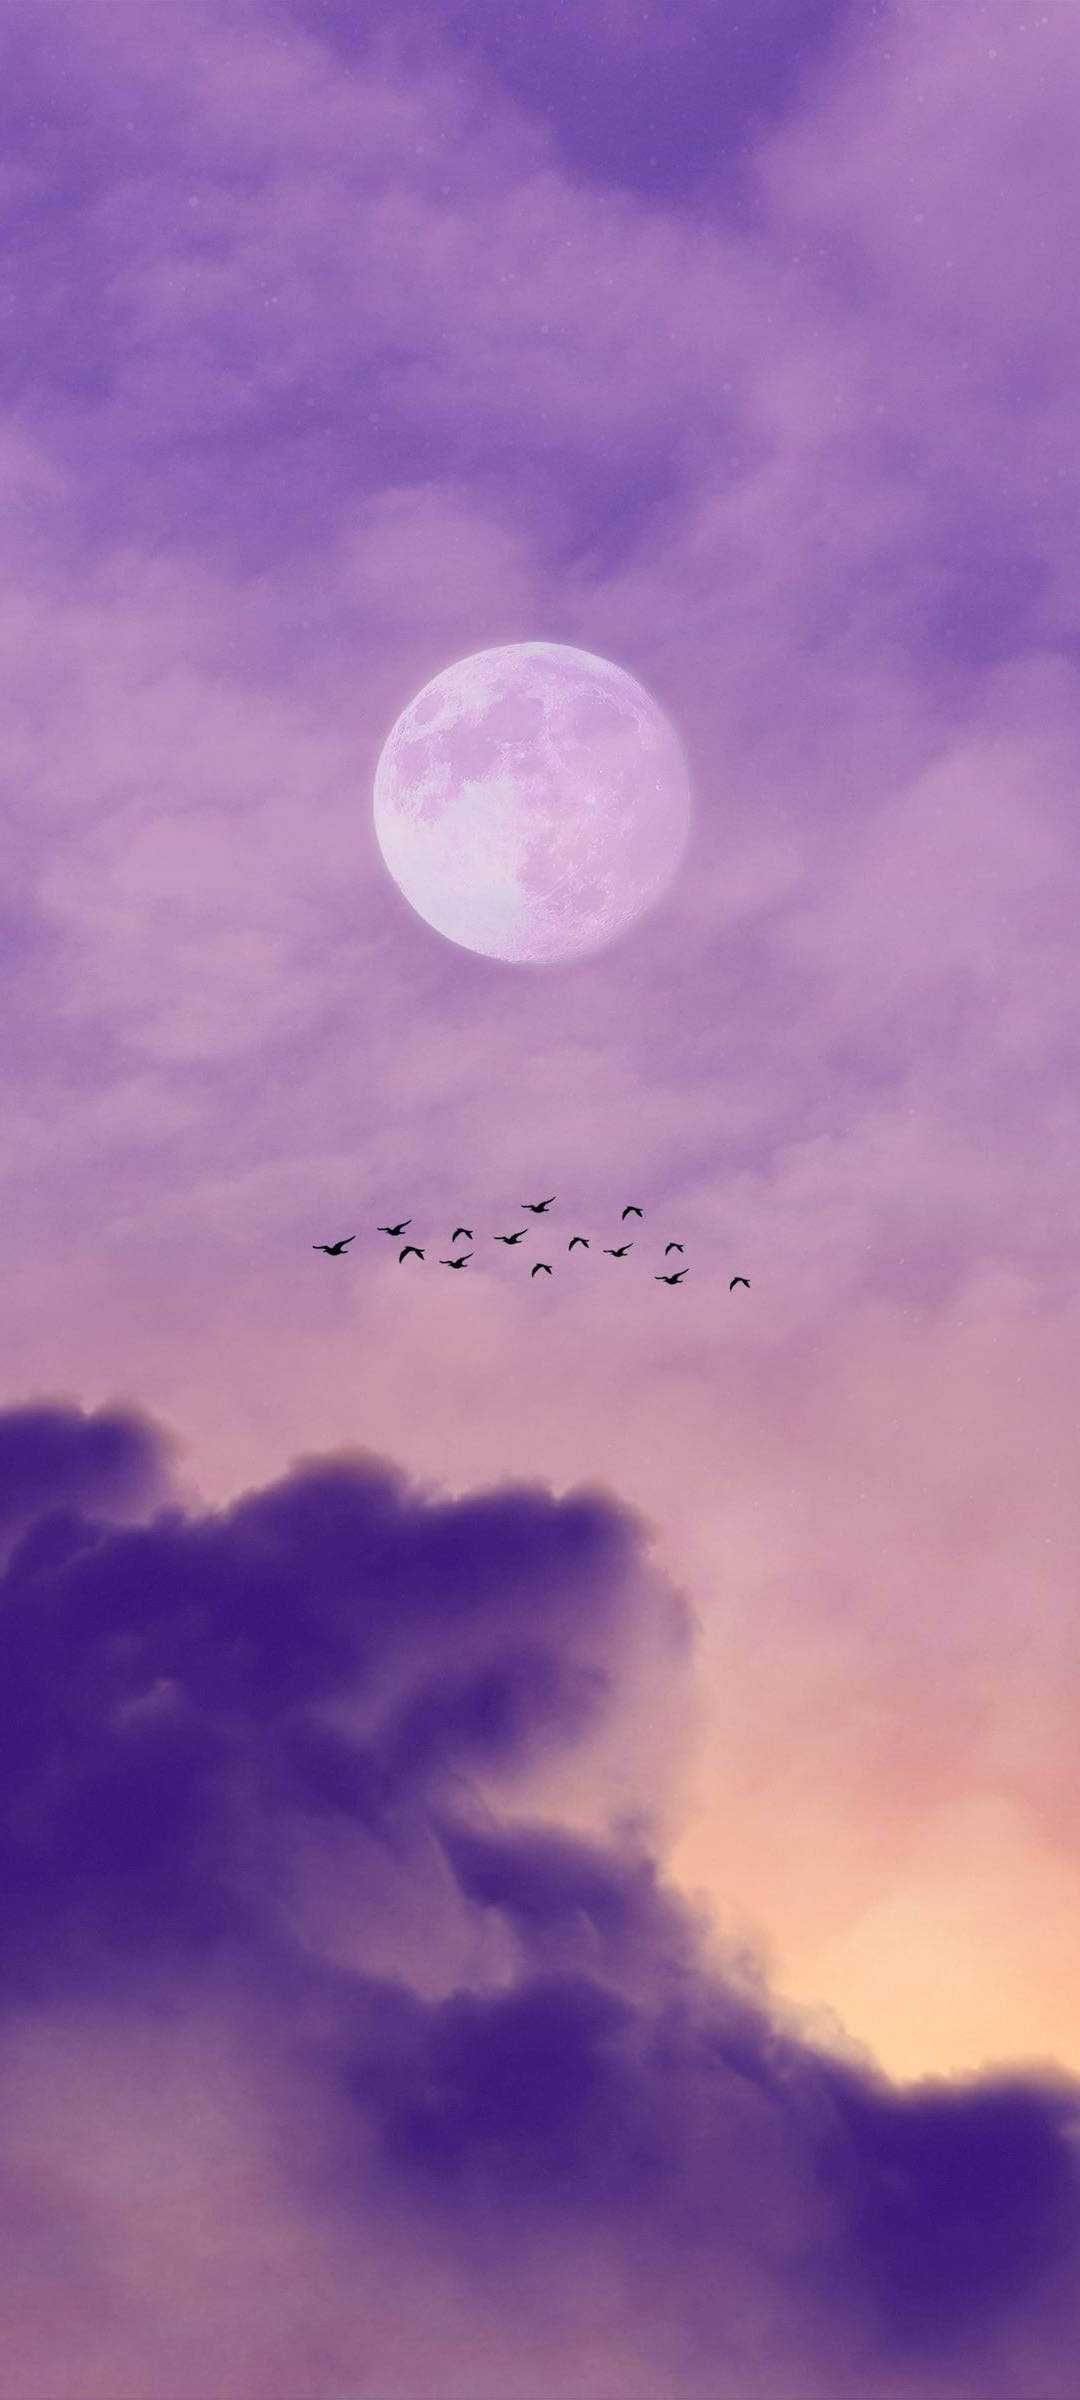 Sky Wallpaper Discover more 1080x Aesthetic, Android, Cute, Moon wallpaper. ht. Cool wallpaper for phones, Phone wallpaper image, Phone wallpaper